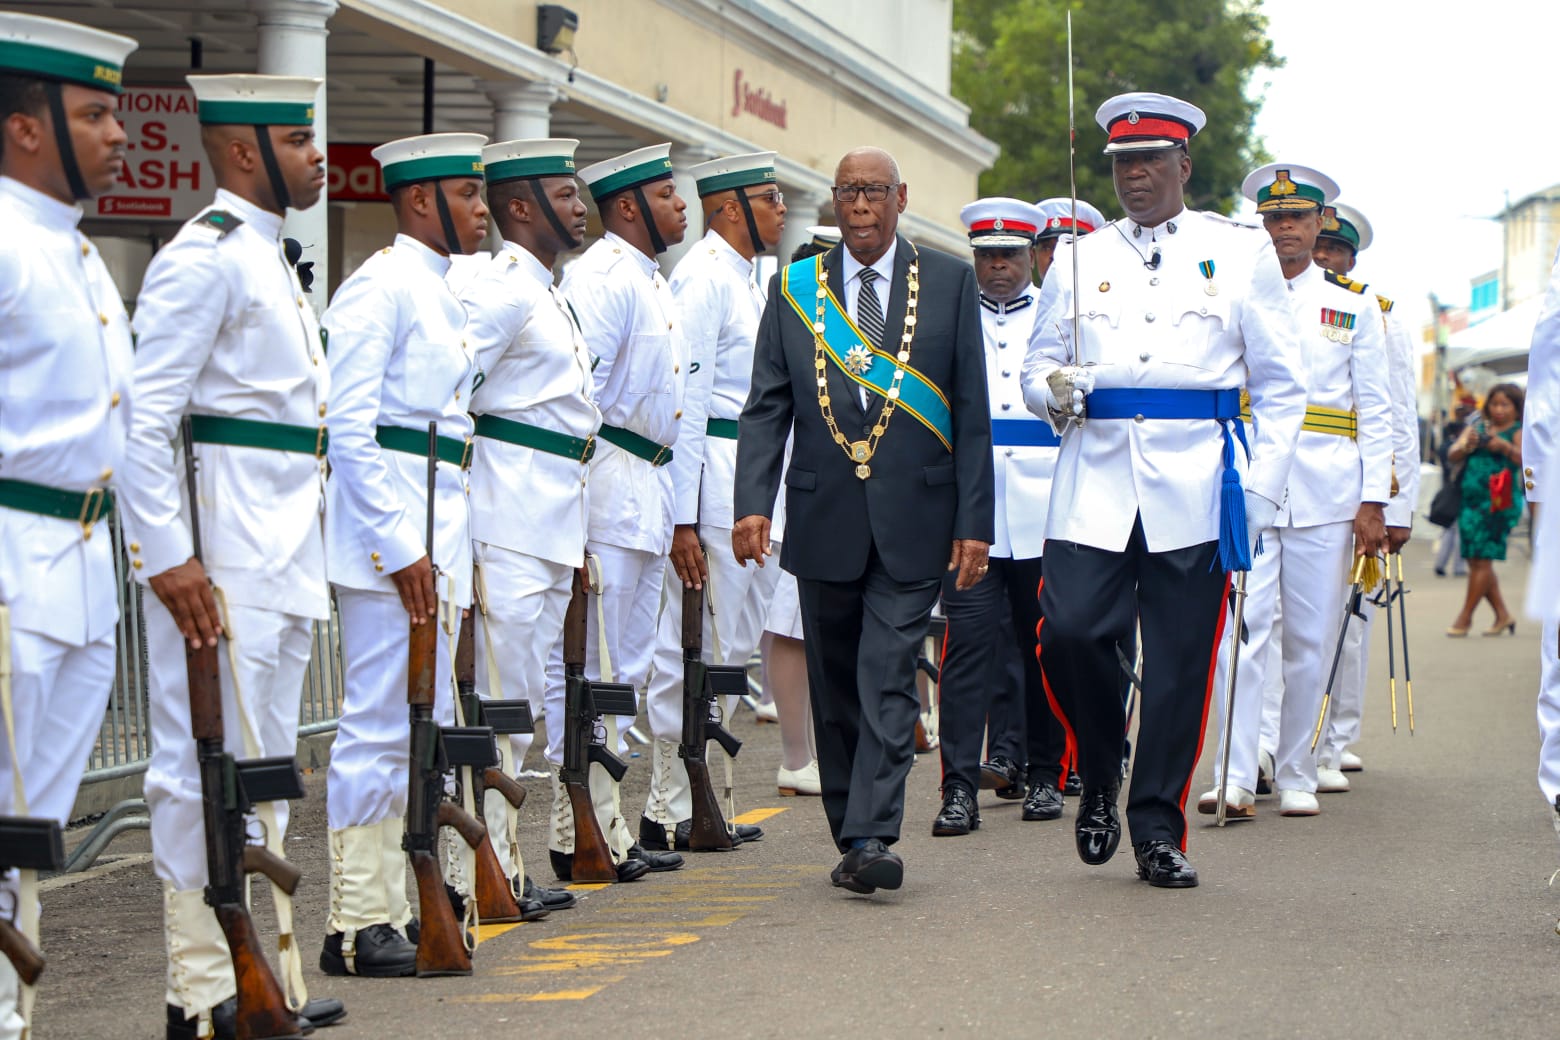 His Excellency first  inspection as Governor General